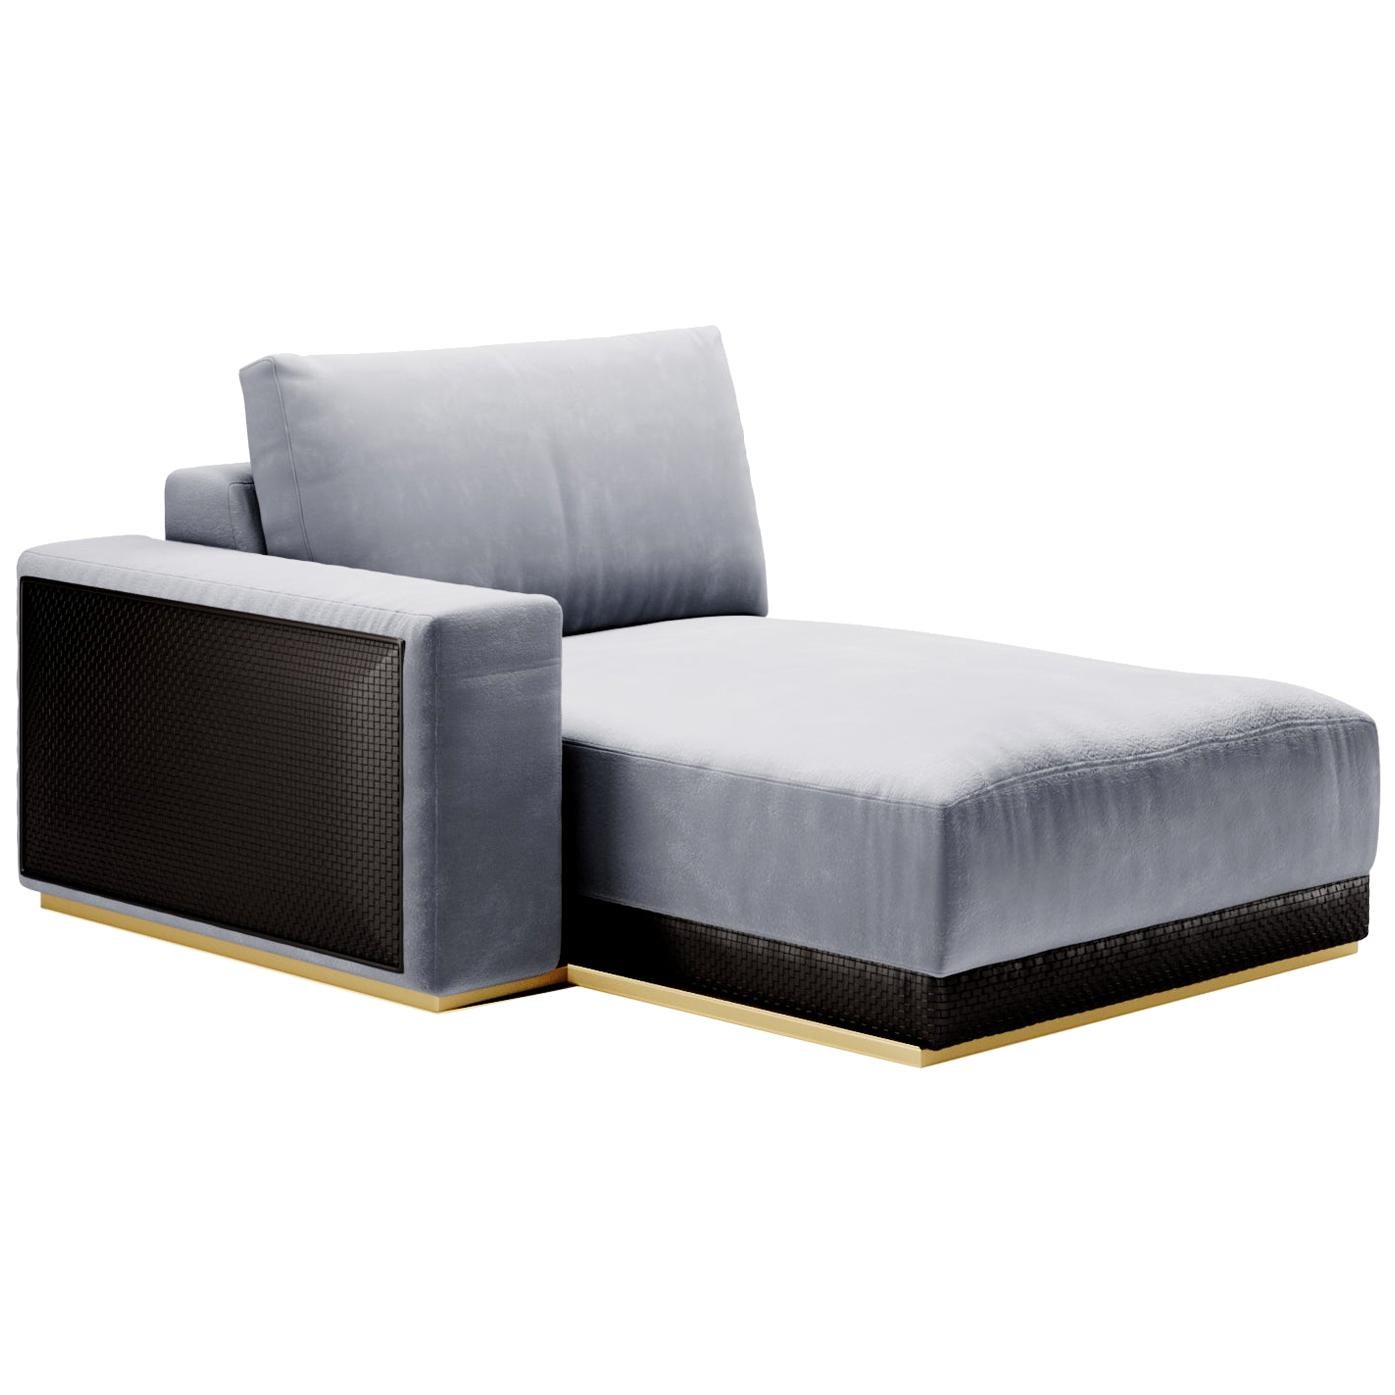 Gaston Chaise Lounge, Contemporary Sofa Settee Velvet Leather For Sale